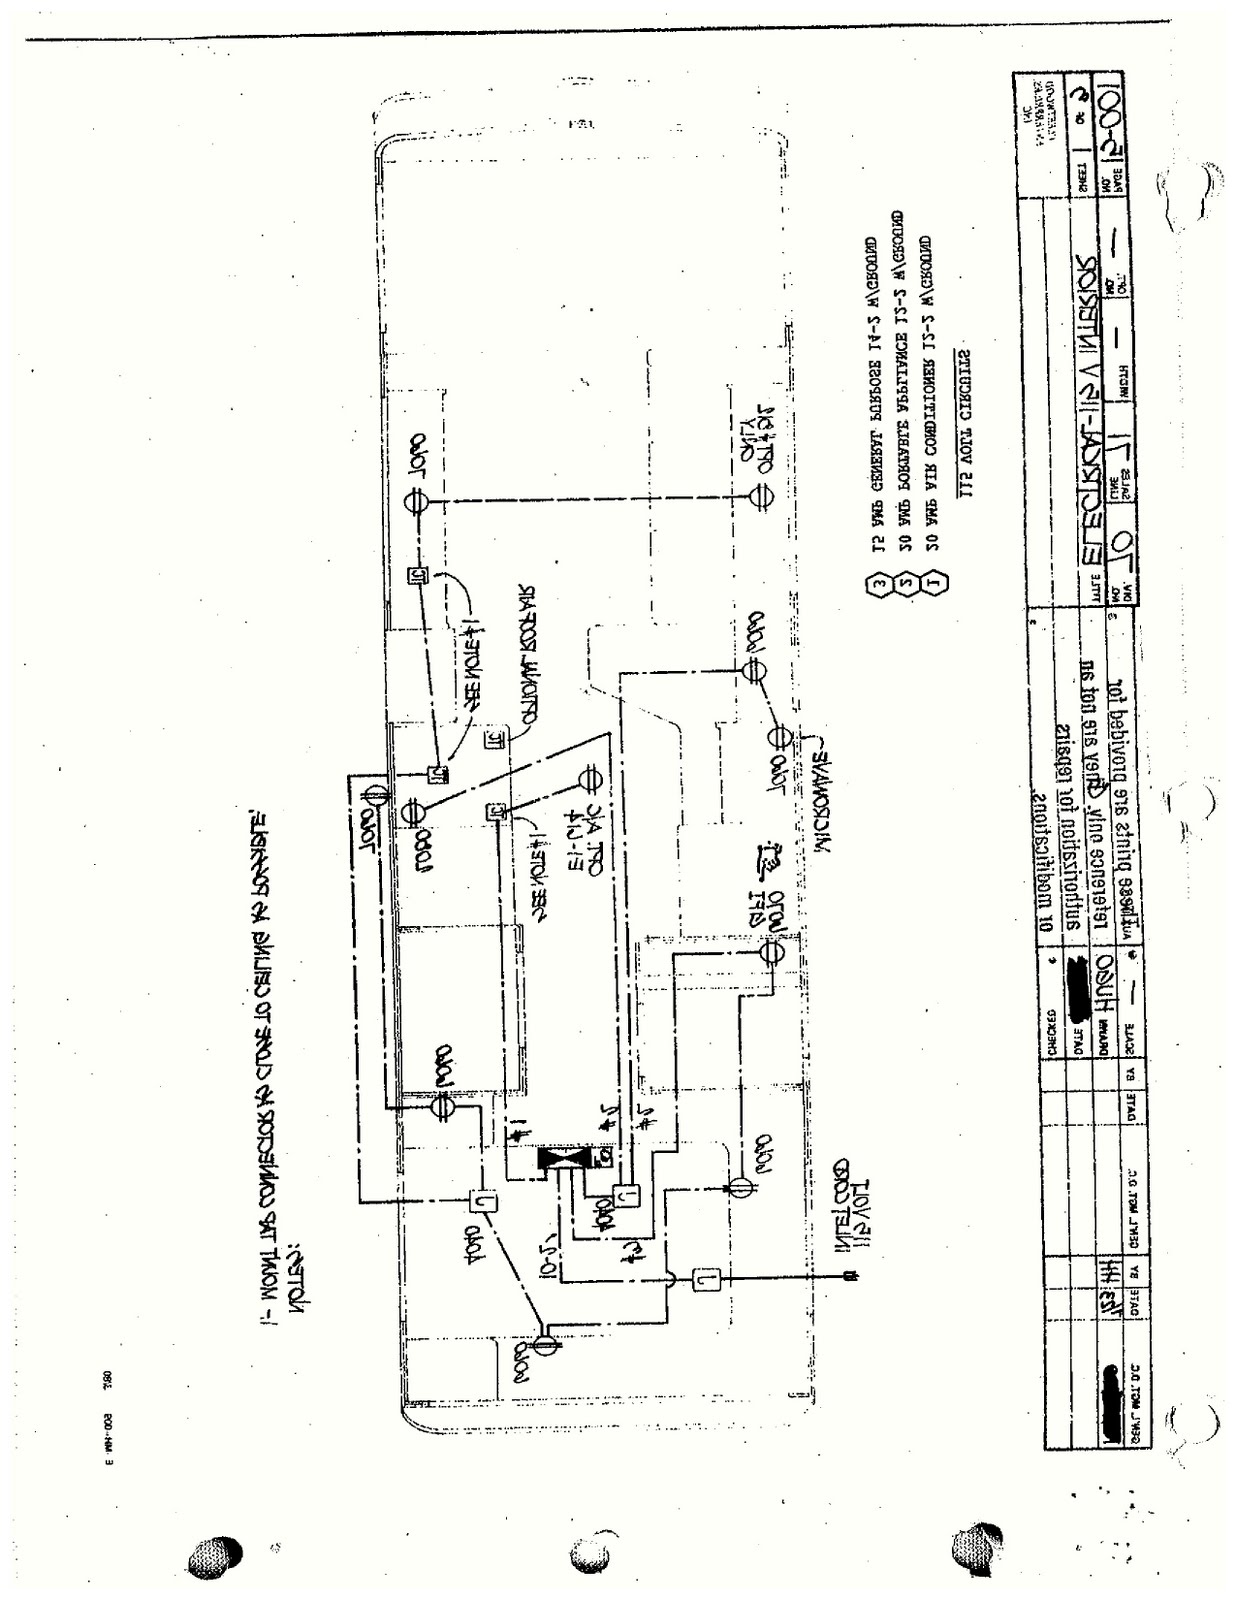 1989 pace arrow wiring diagram